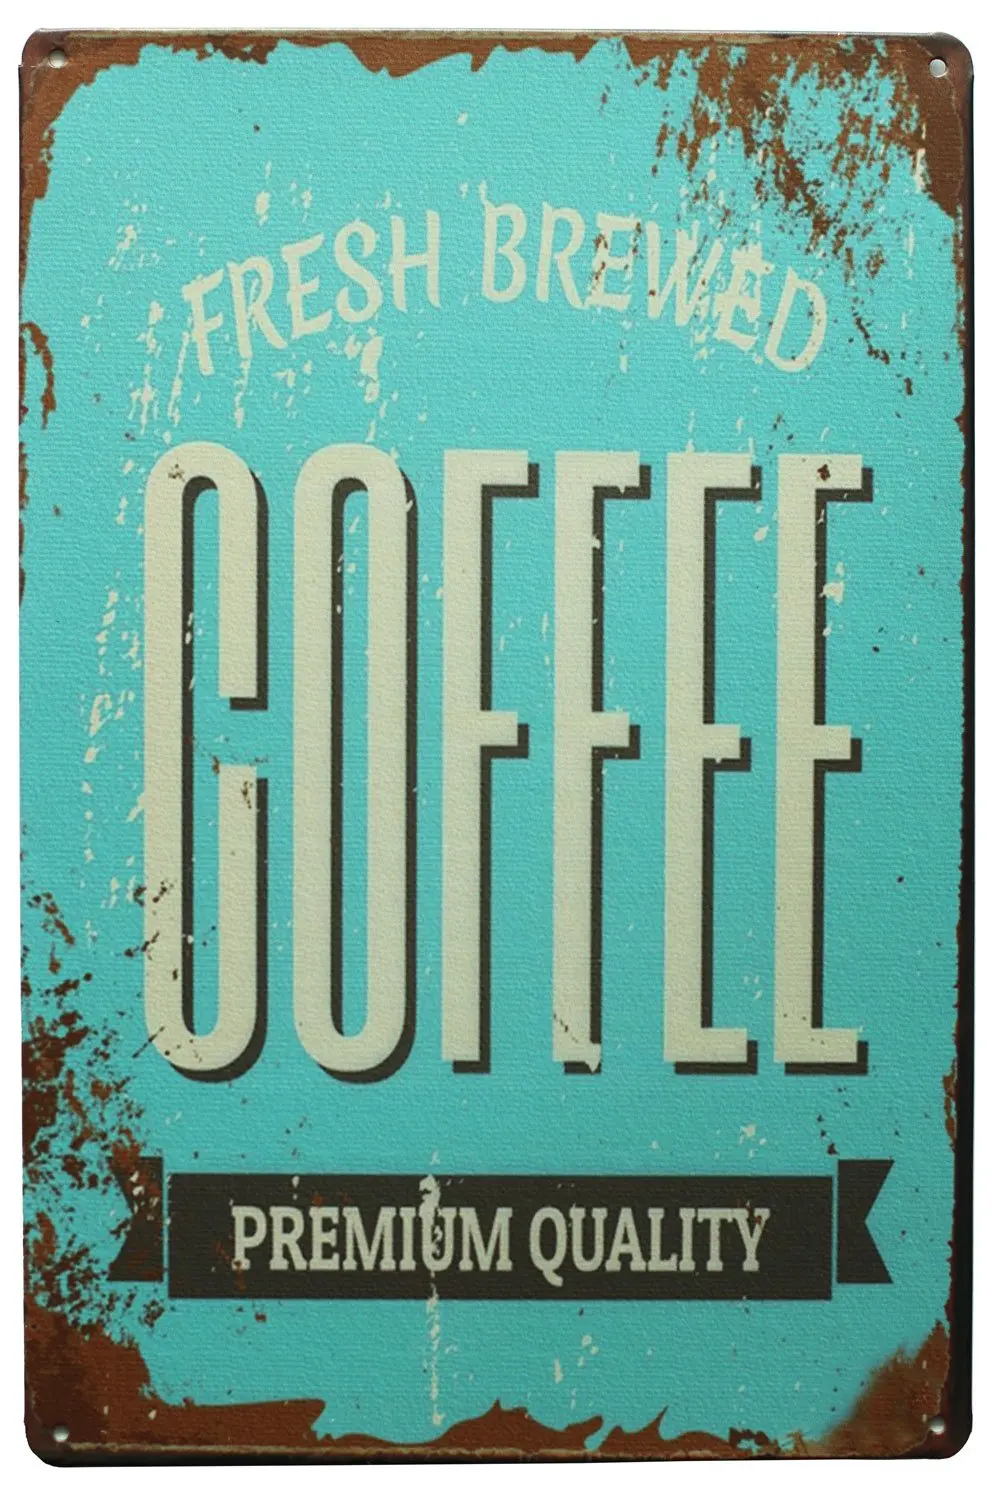 

Fresh Brewed Coffee Premium Quality, Metal Tin Sign, Vintage Art Poster Plaque Kitchen Cafe Home Wall Decor